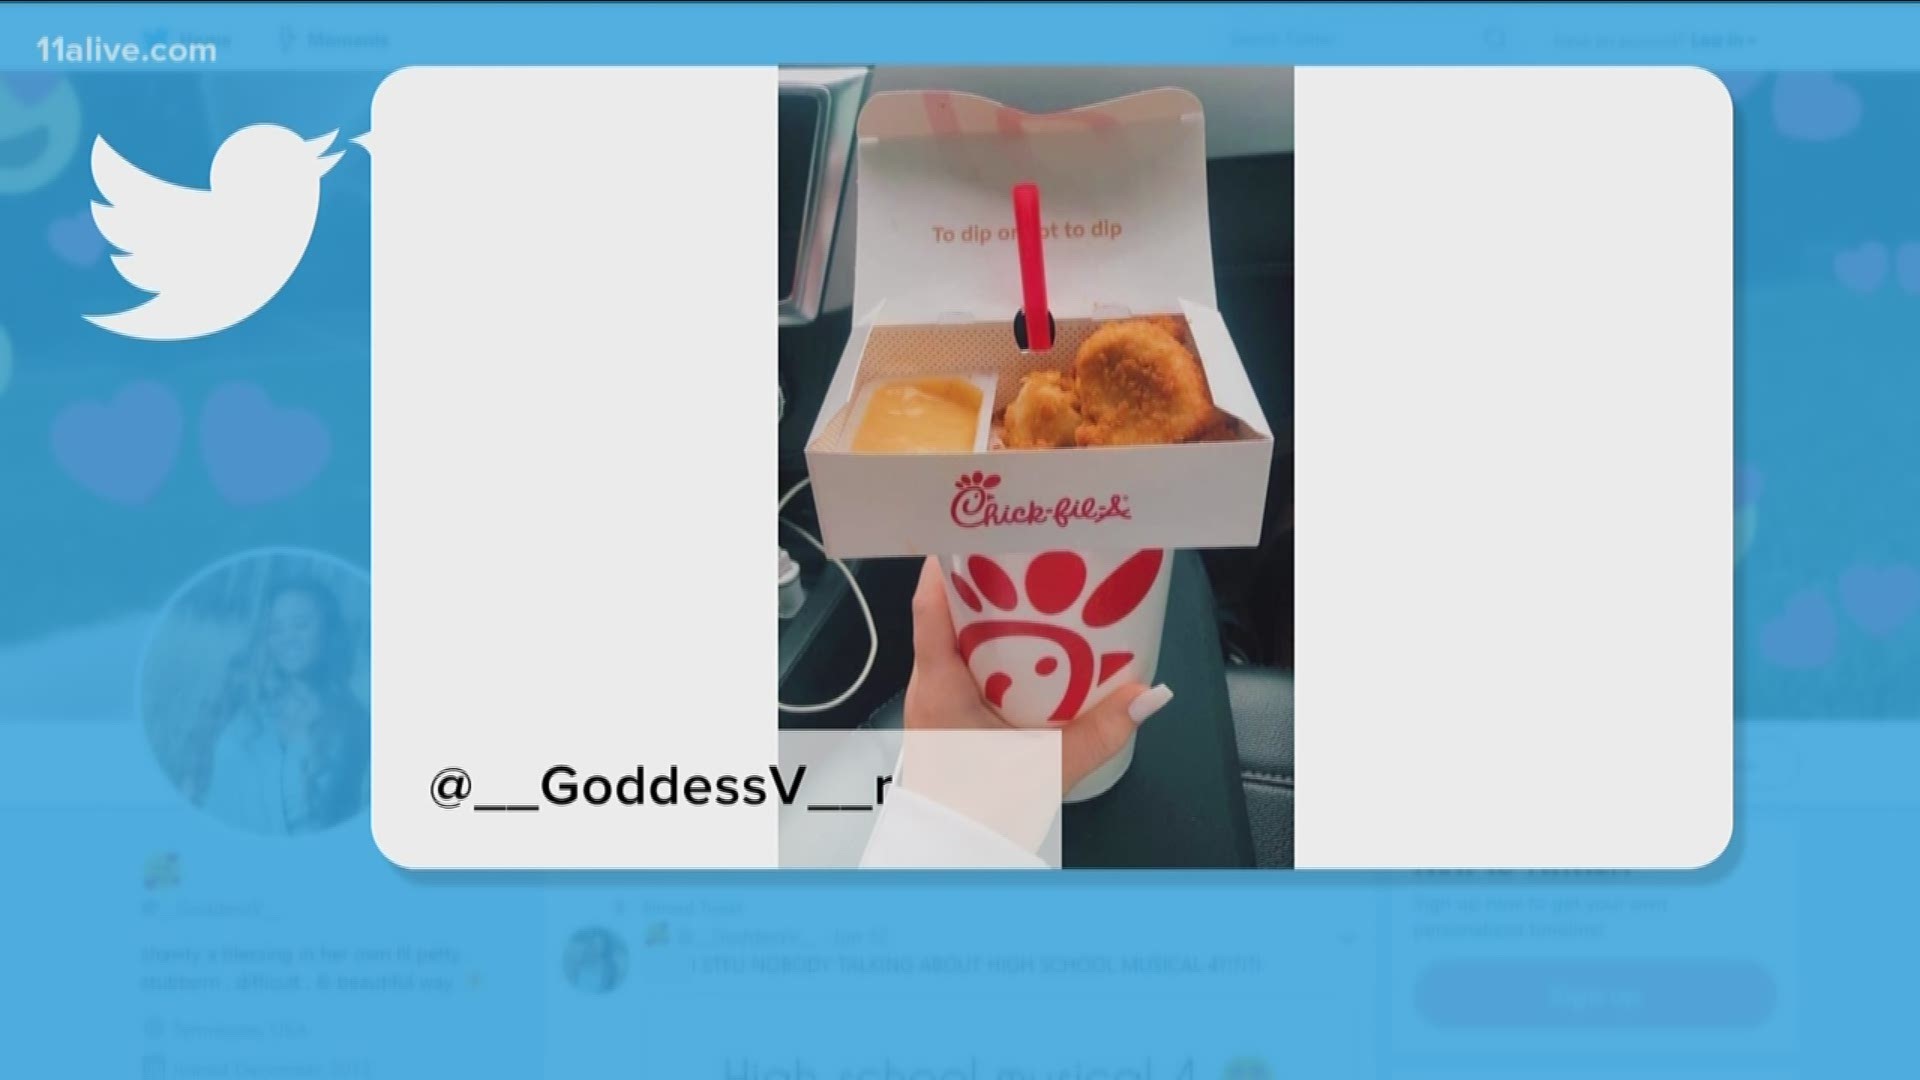 A Georgia woman shared a photo where she combined her drink and chicken nuggets meal from Chick-fil-A. Chick-fil-A is now available for delivery through DoorDash.